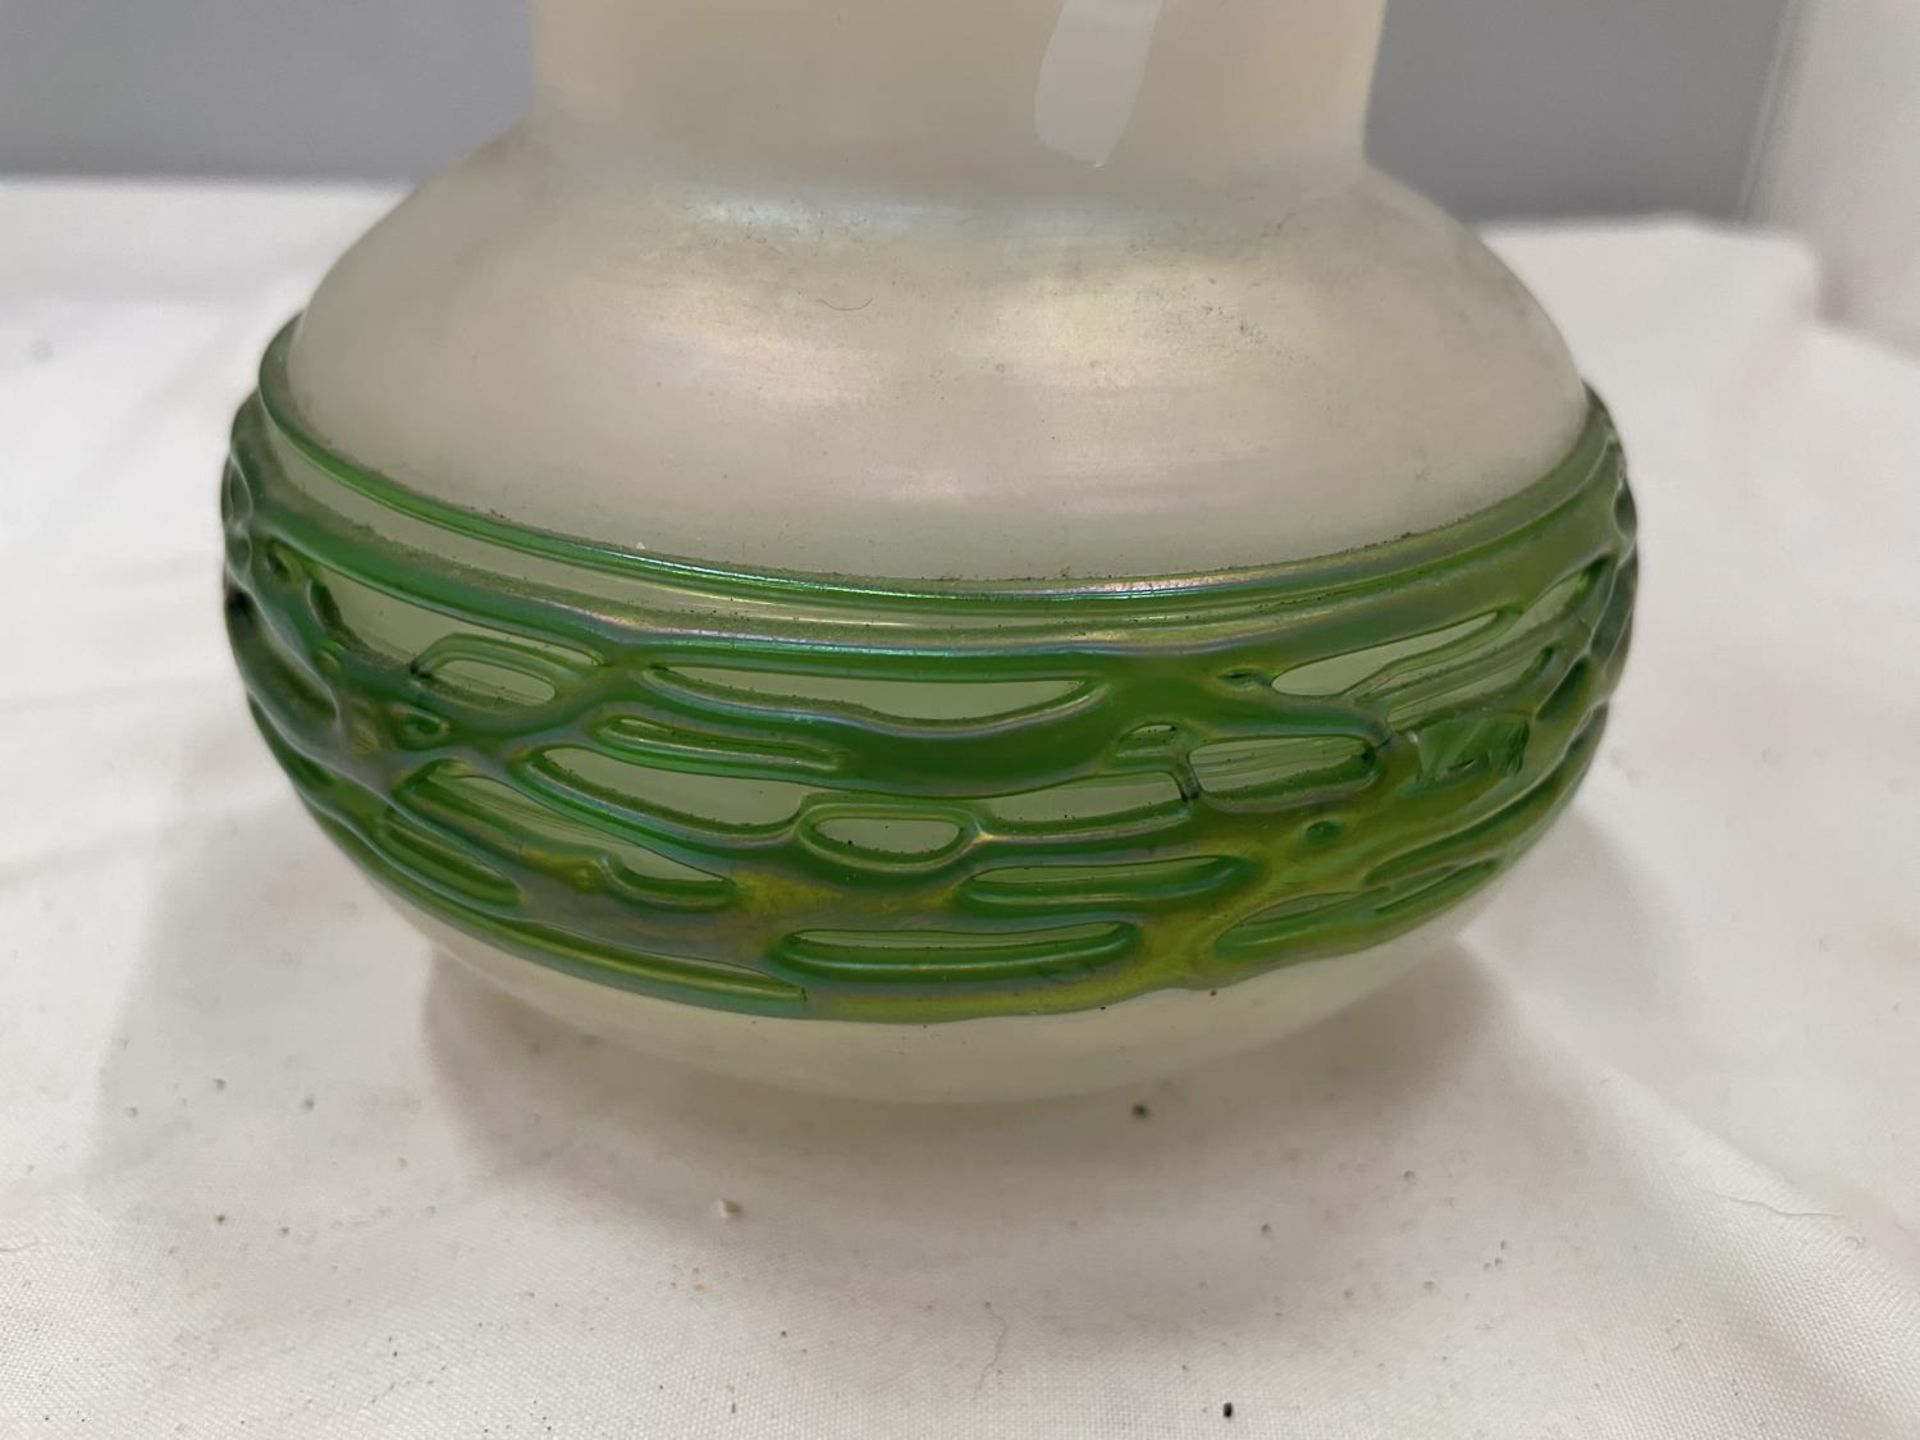 AN IRIDESCENT PEARL ART GLASS VASE WITH APPLIED GREEN DECORATION AND A BRASS METAL FROG - Image 4 of 4